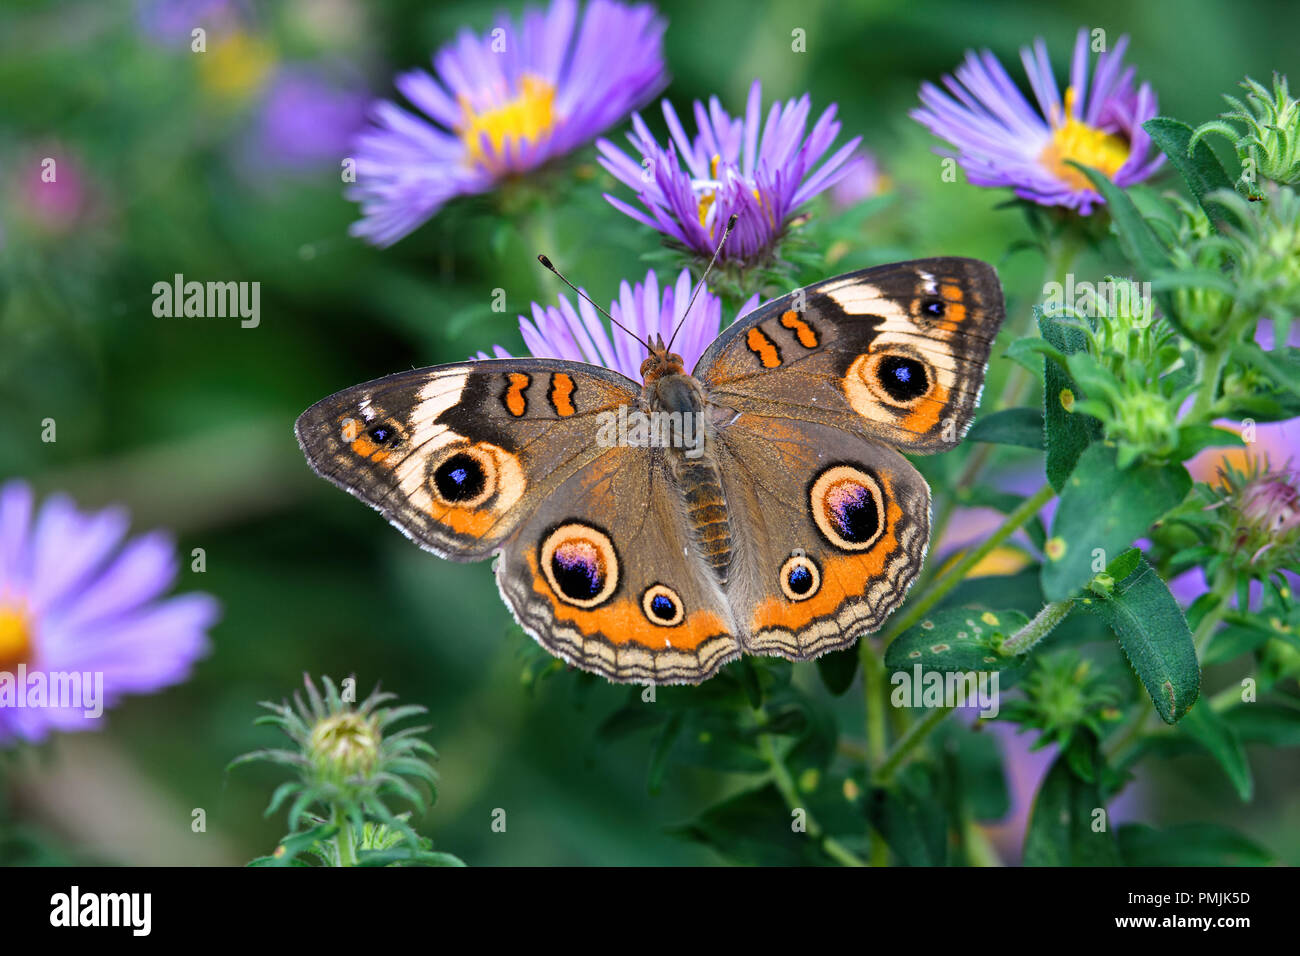 Junonia coenia, known as the common buckeye or buckeye on New England Aster. It is in the family Nymphalidae. Stock Photo